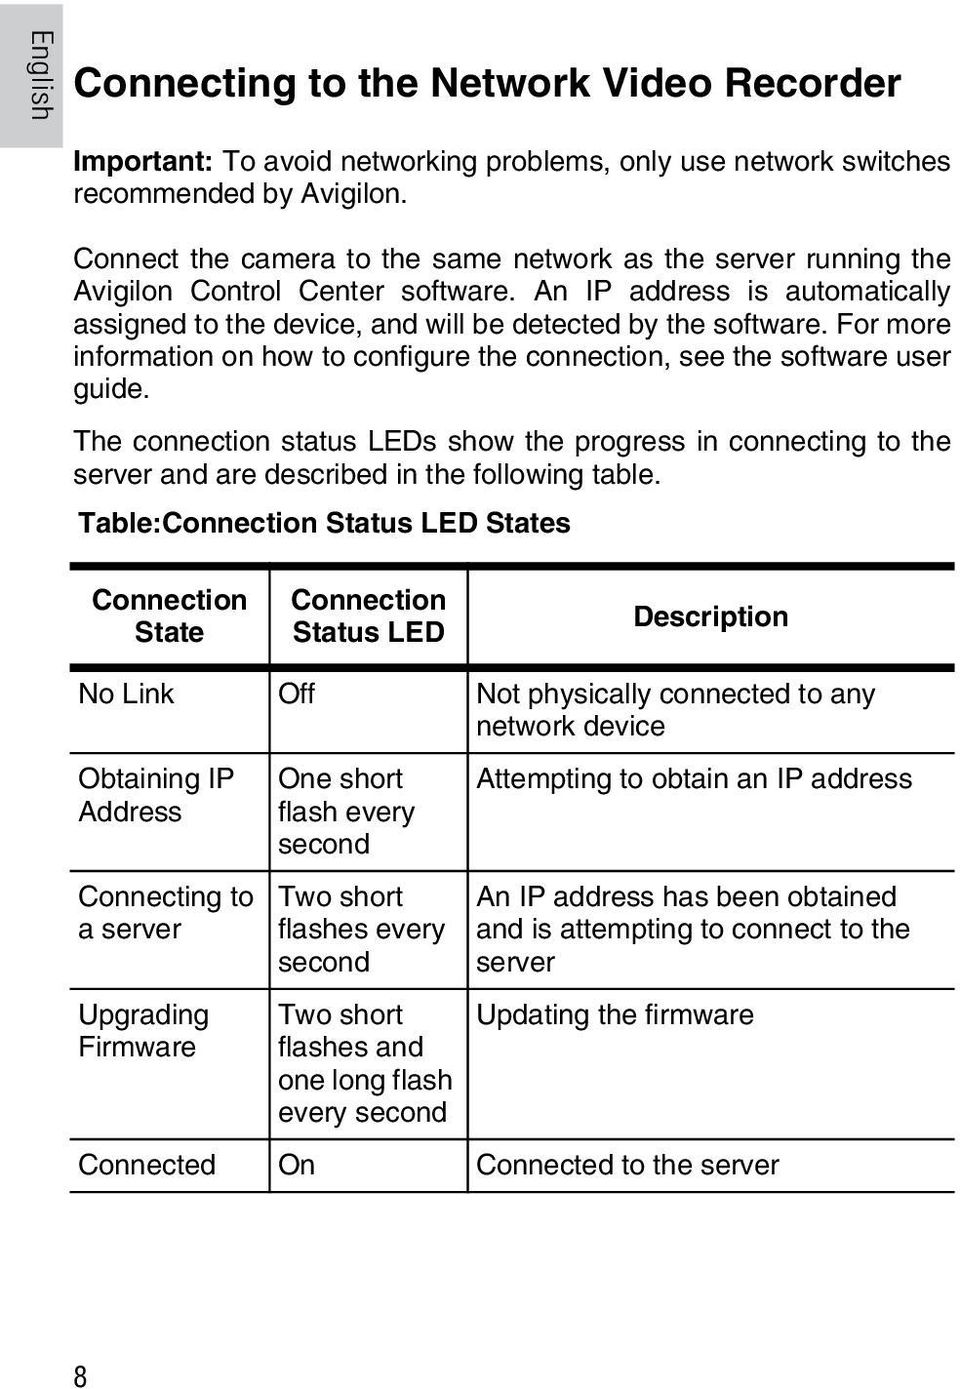 For more information on how to configure the connection, see the software user guide. The connection status LEDs show the progress in connecting to the server and are described in the following table.